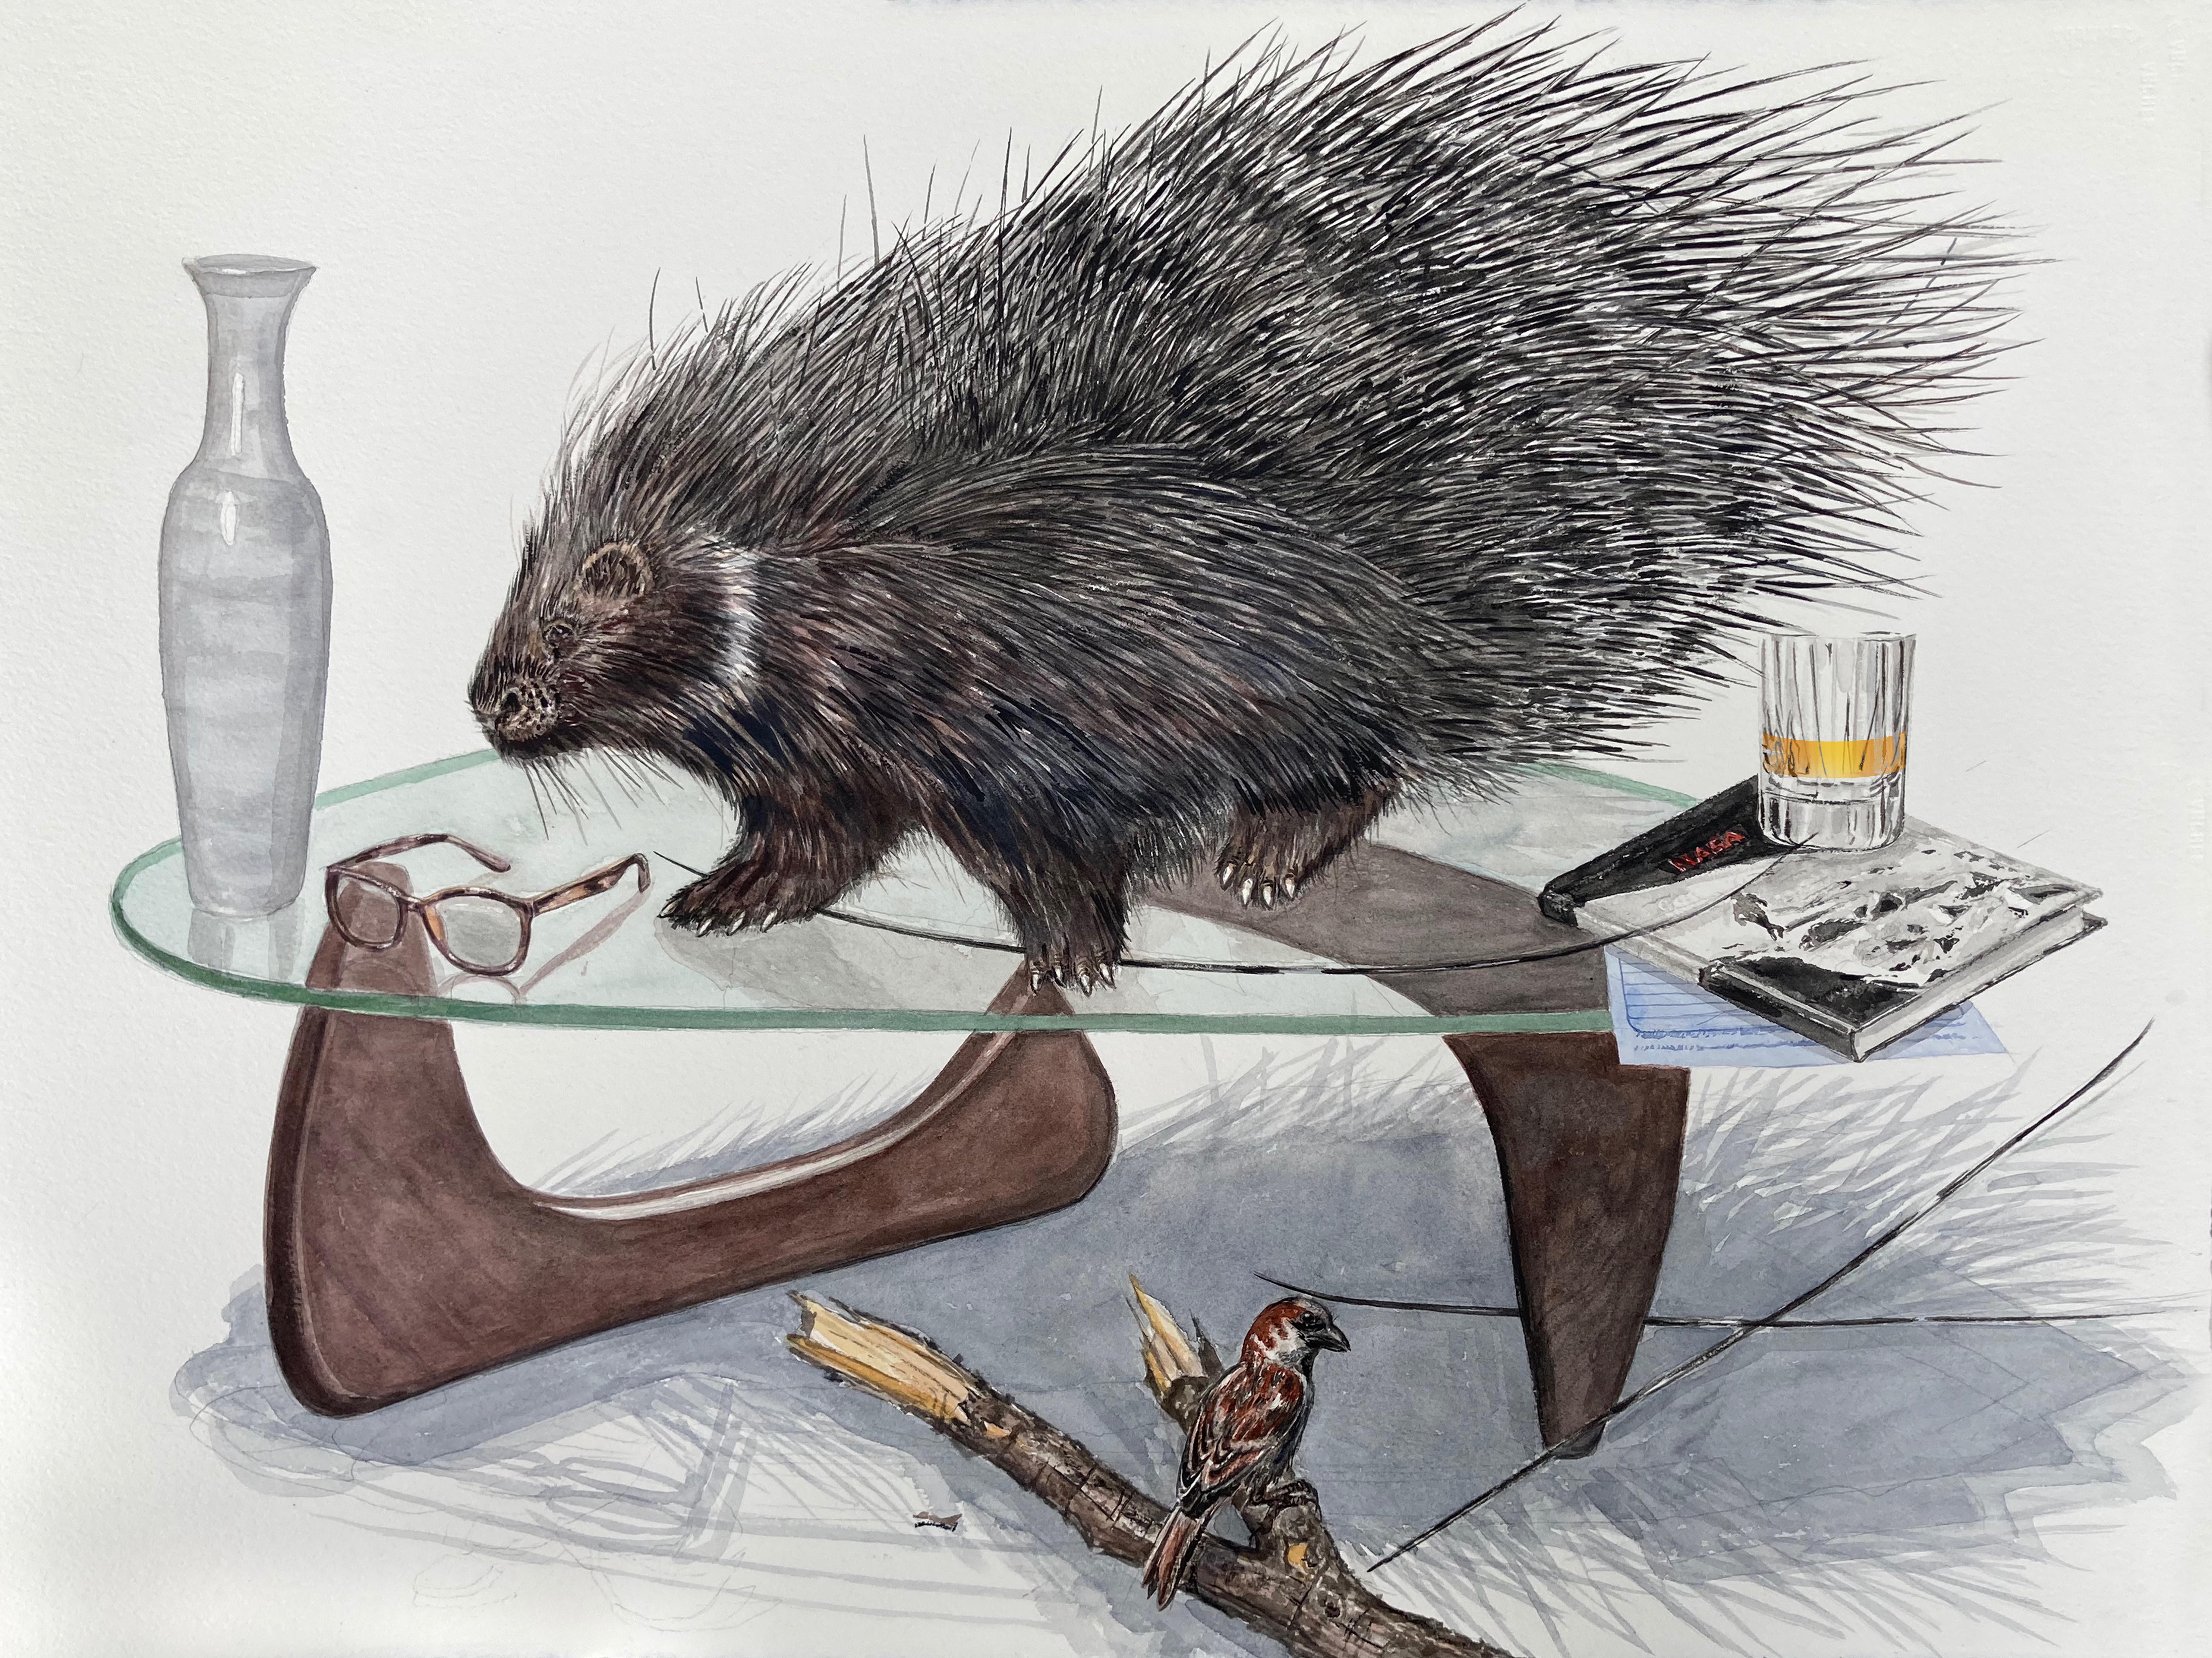 "Quills" Contemporary Surrealist painting (porcupine, mid-century modern table)